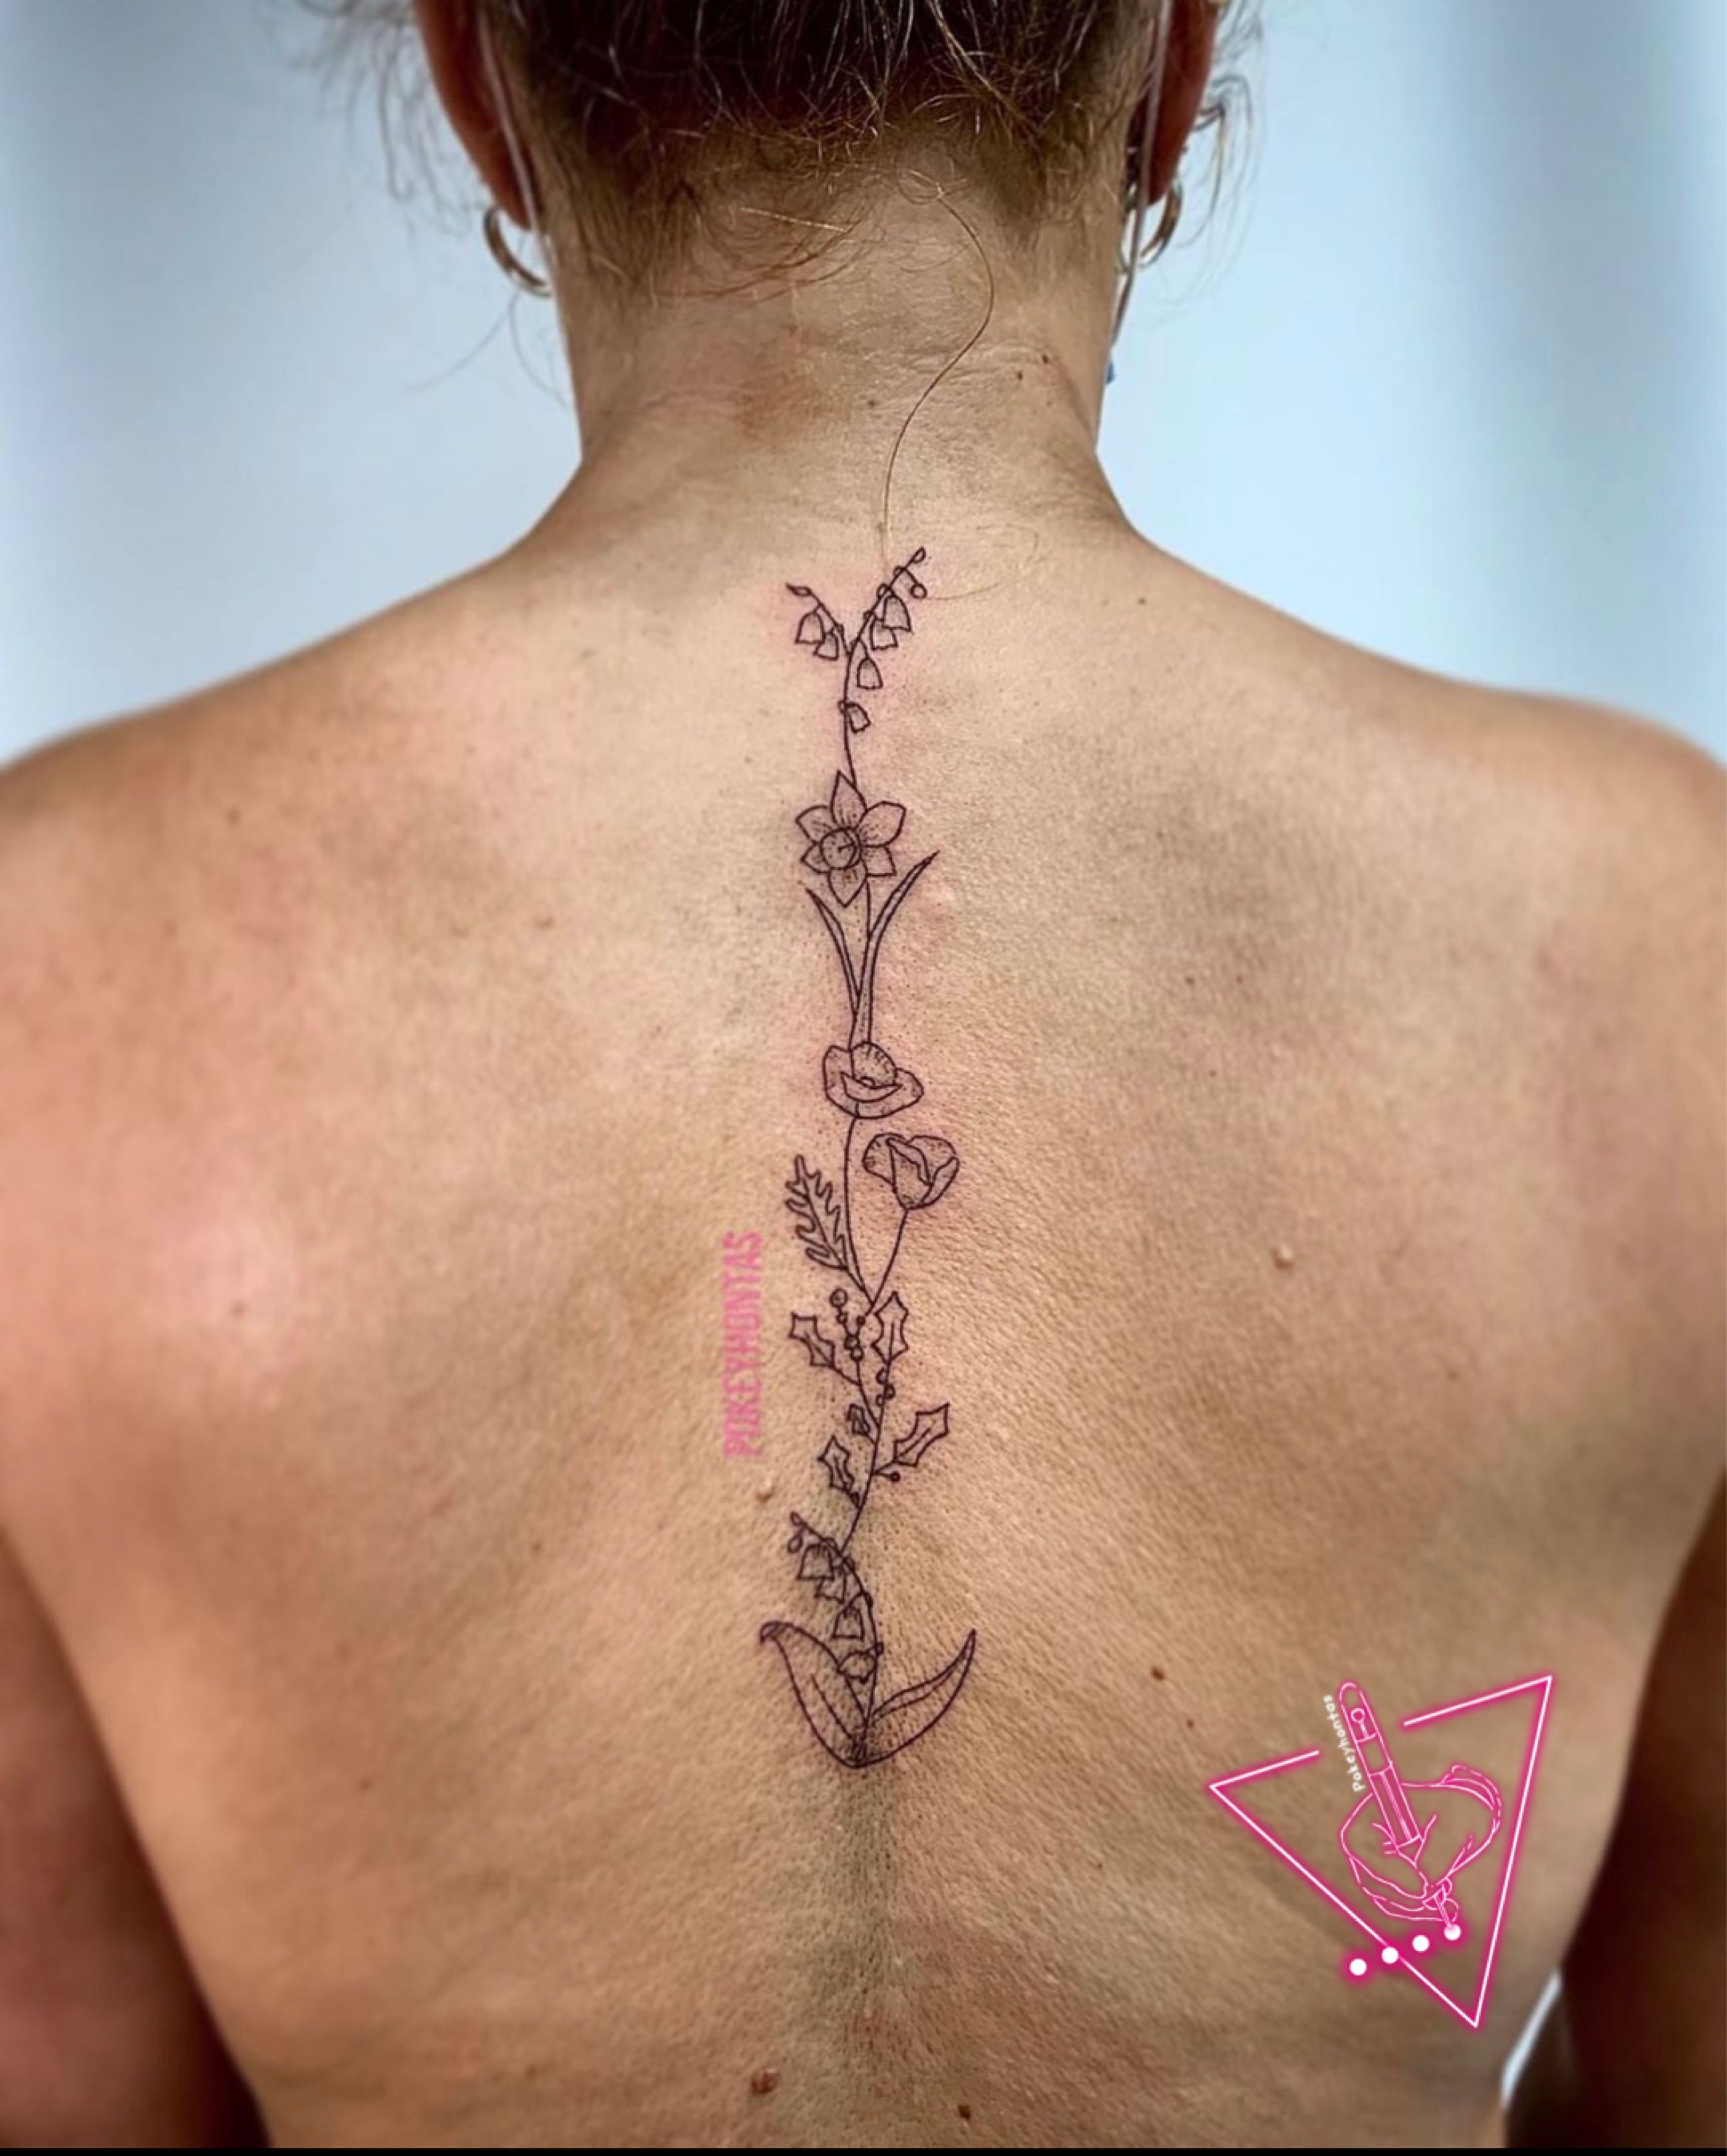 Spine Tattoos Ideas: Explore Designs, and Aftercare Tips